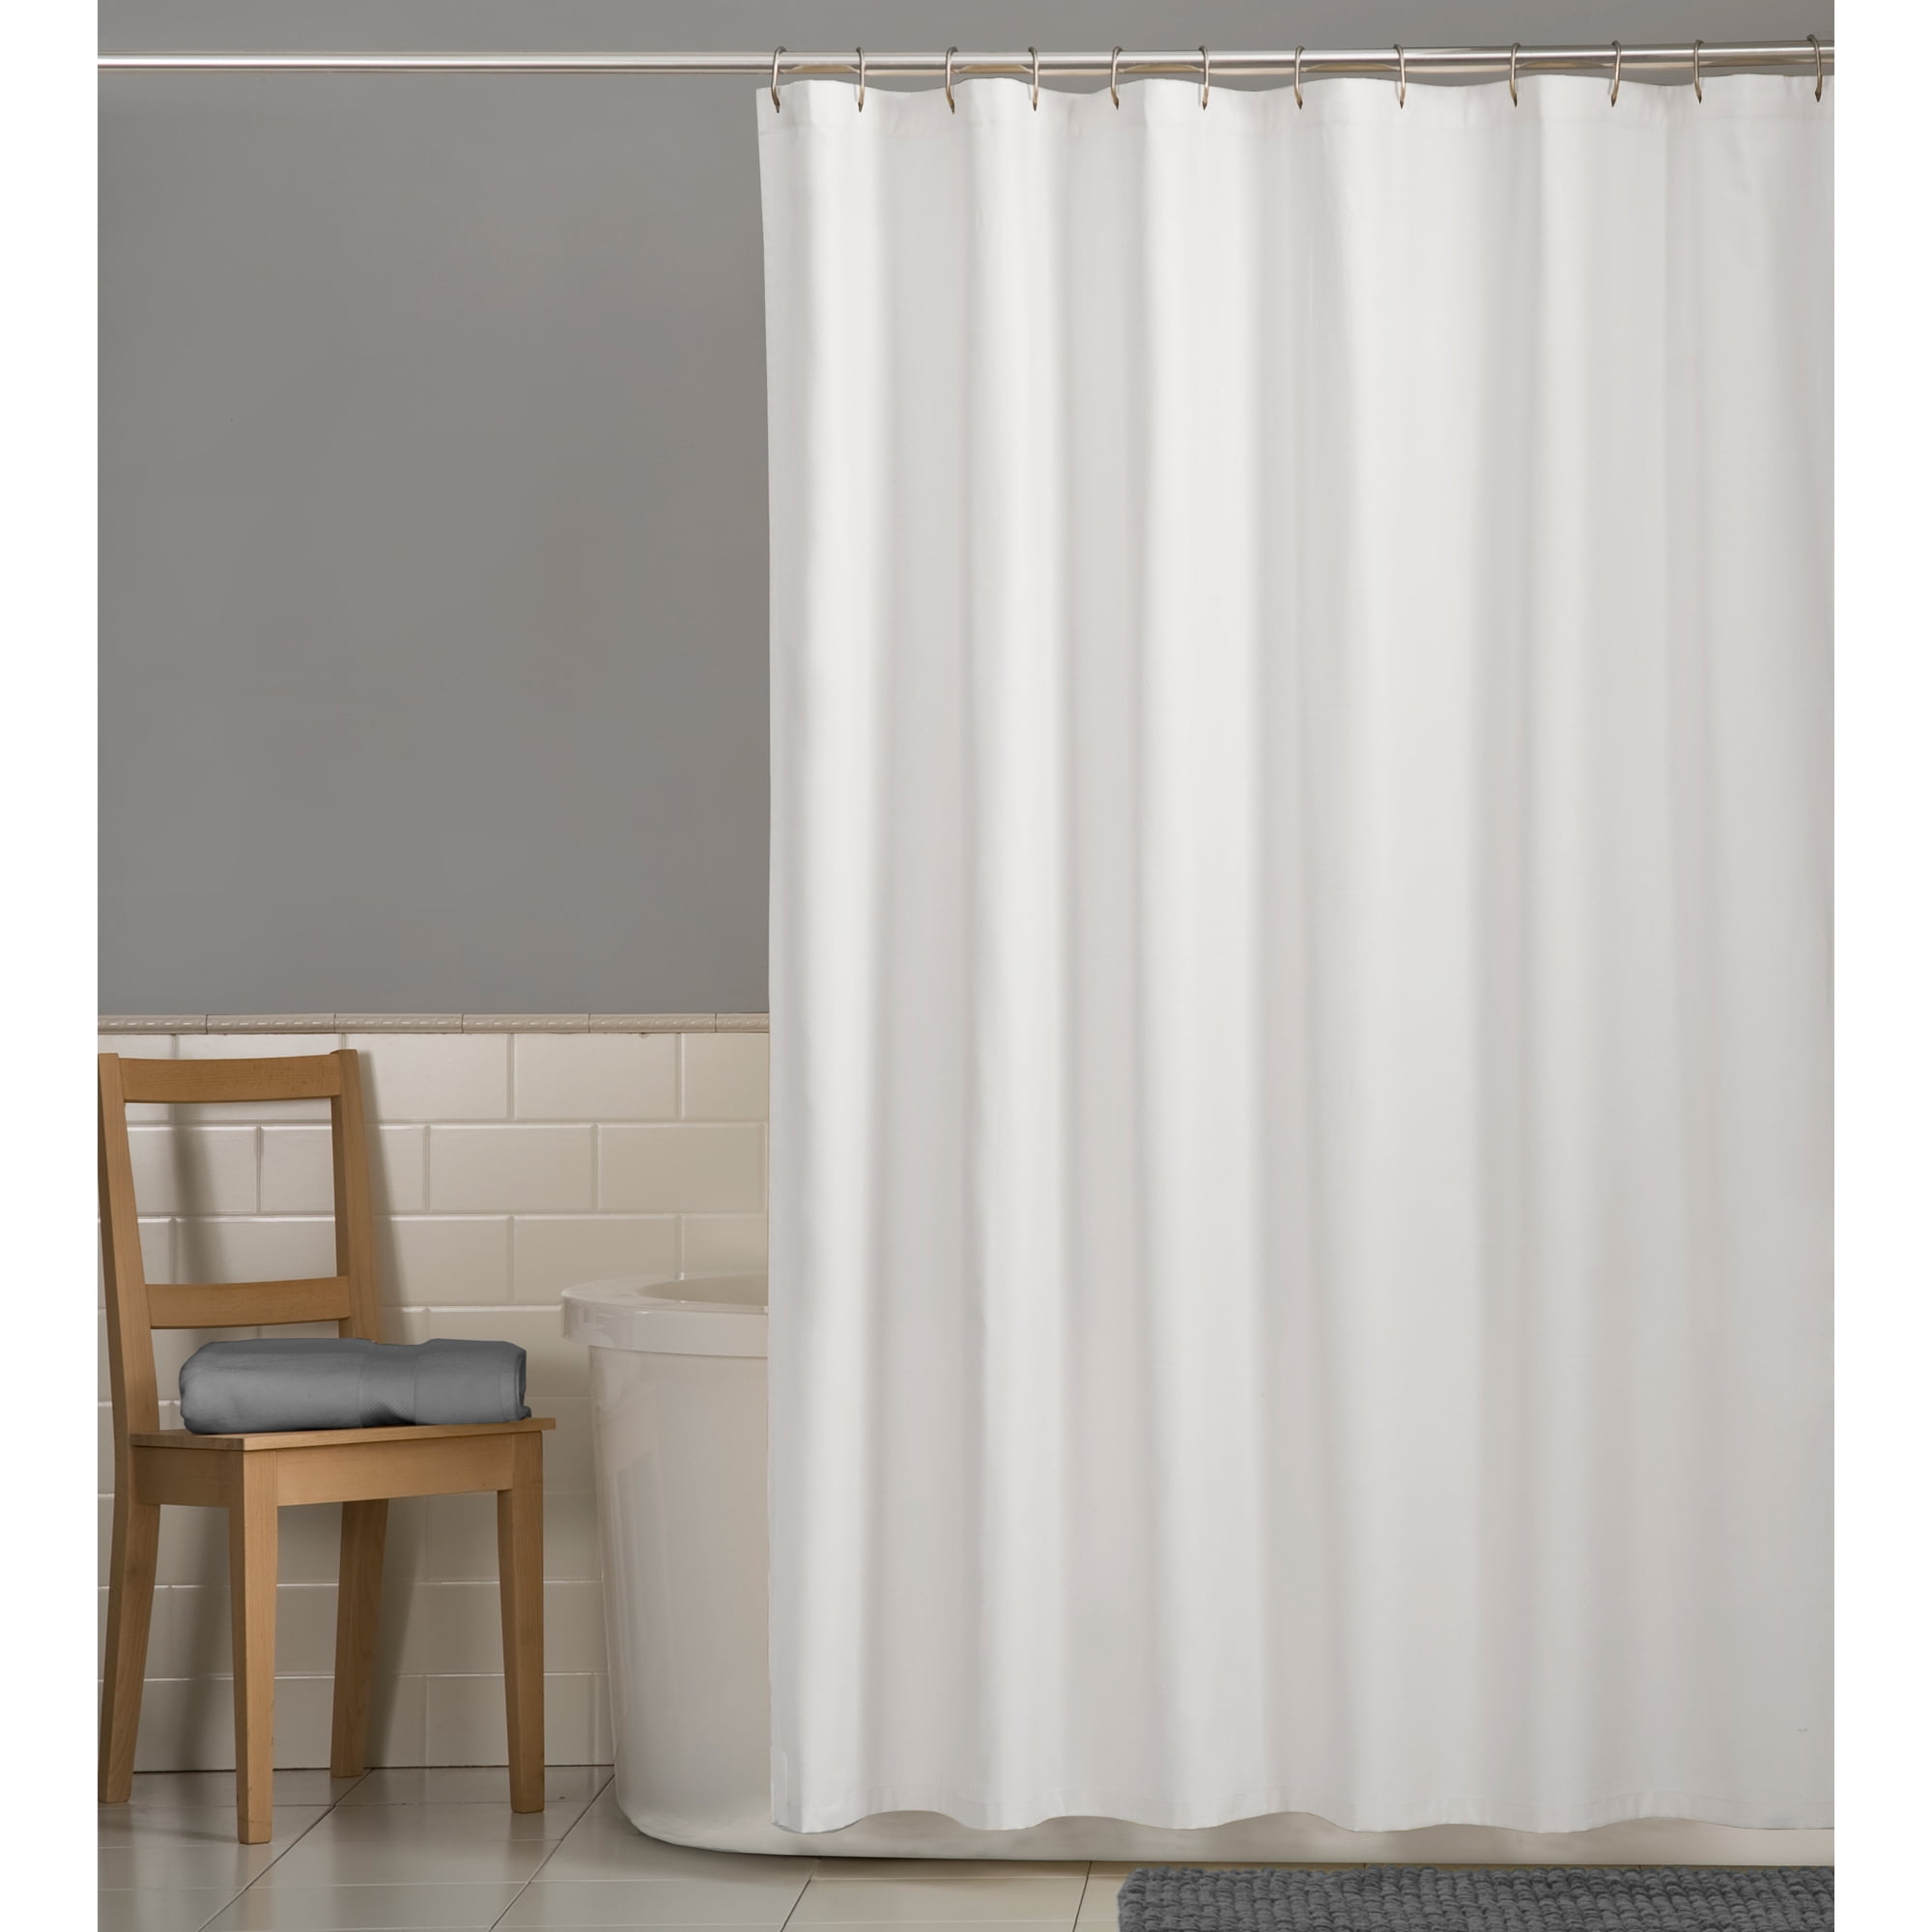 70" x 72" Soft Microfiber Shower Curtain Liners with Microban 